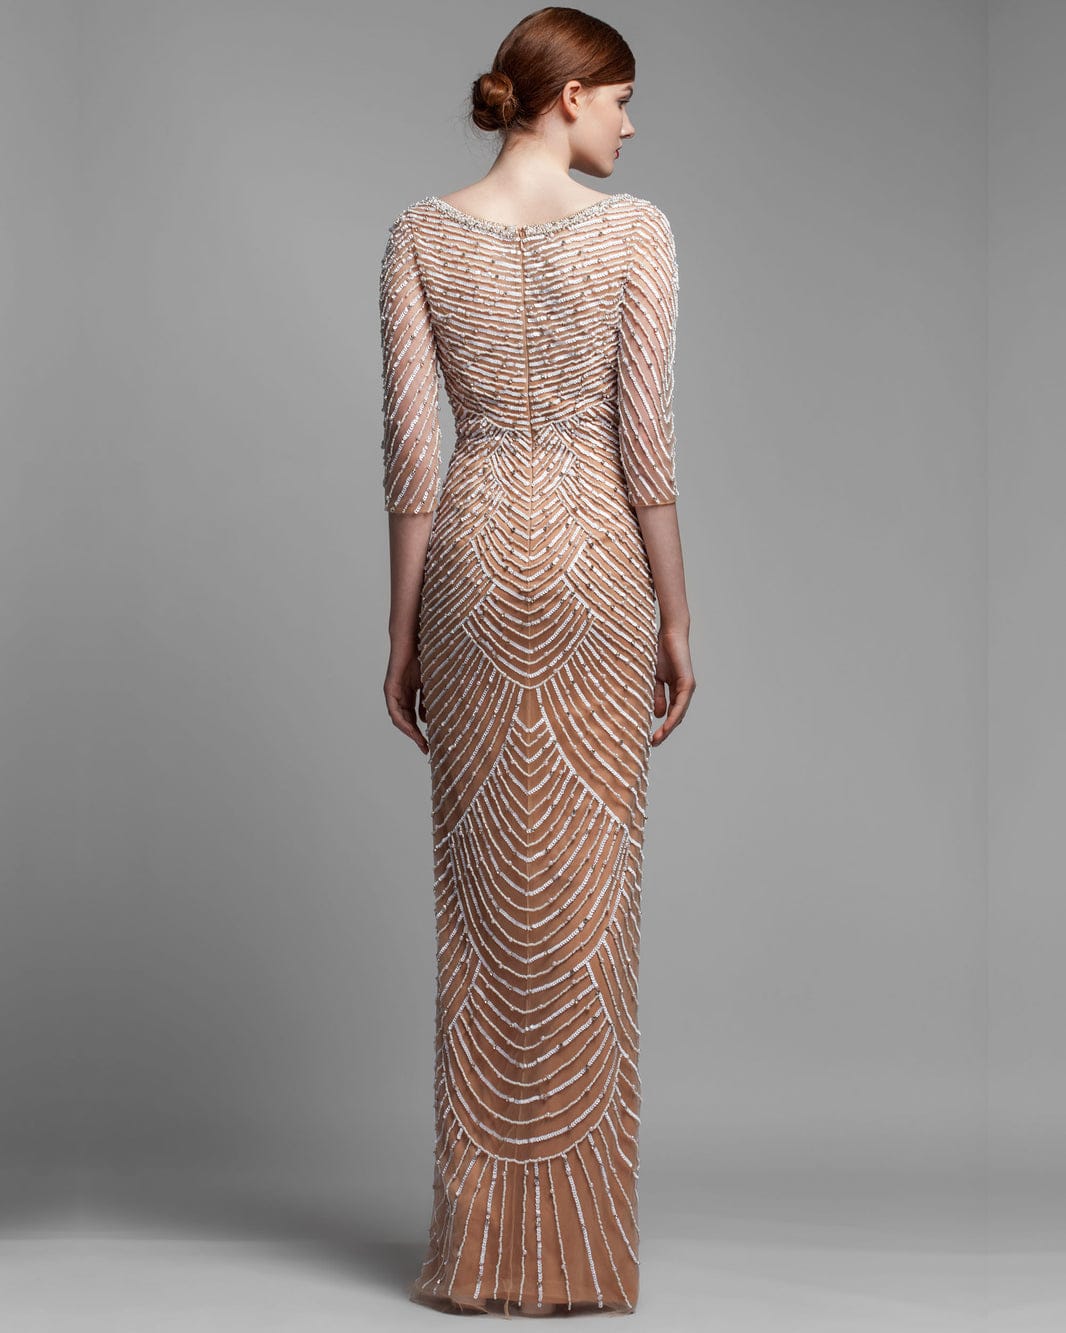 Gemy Maalouf BC1418 Beaded Long Dress in Ivory Skin - Exquisite Elegance with Dropped Neckline